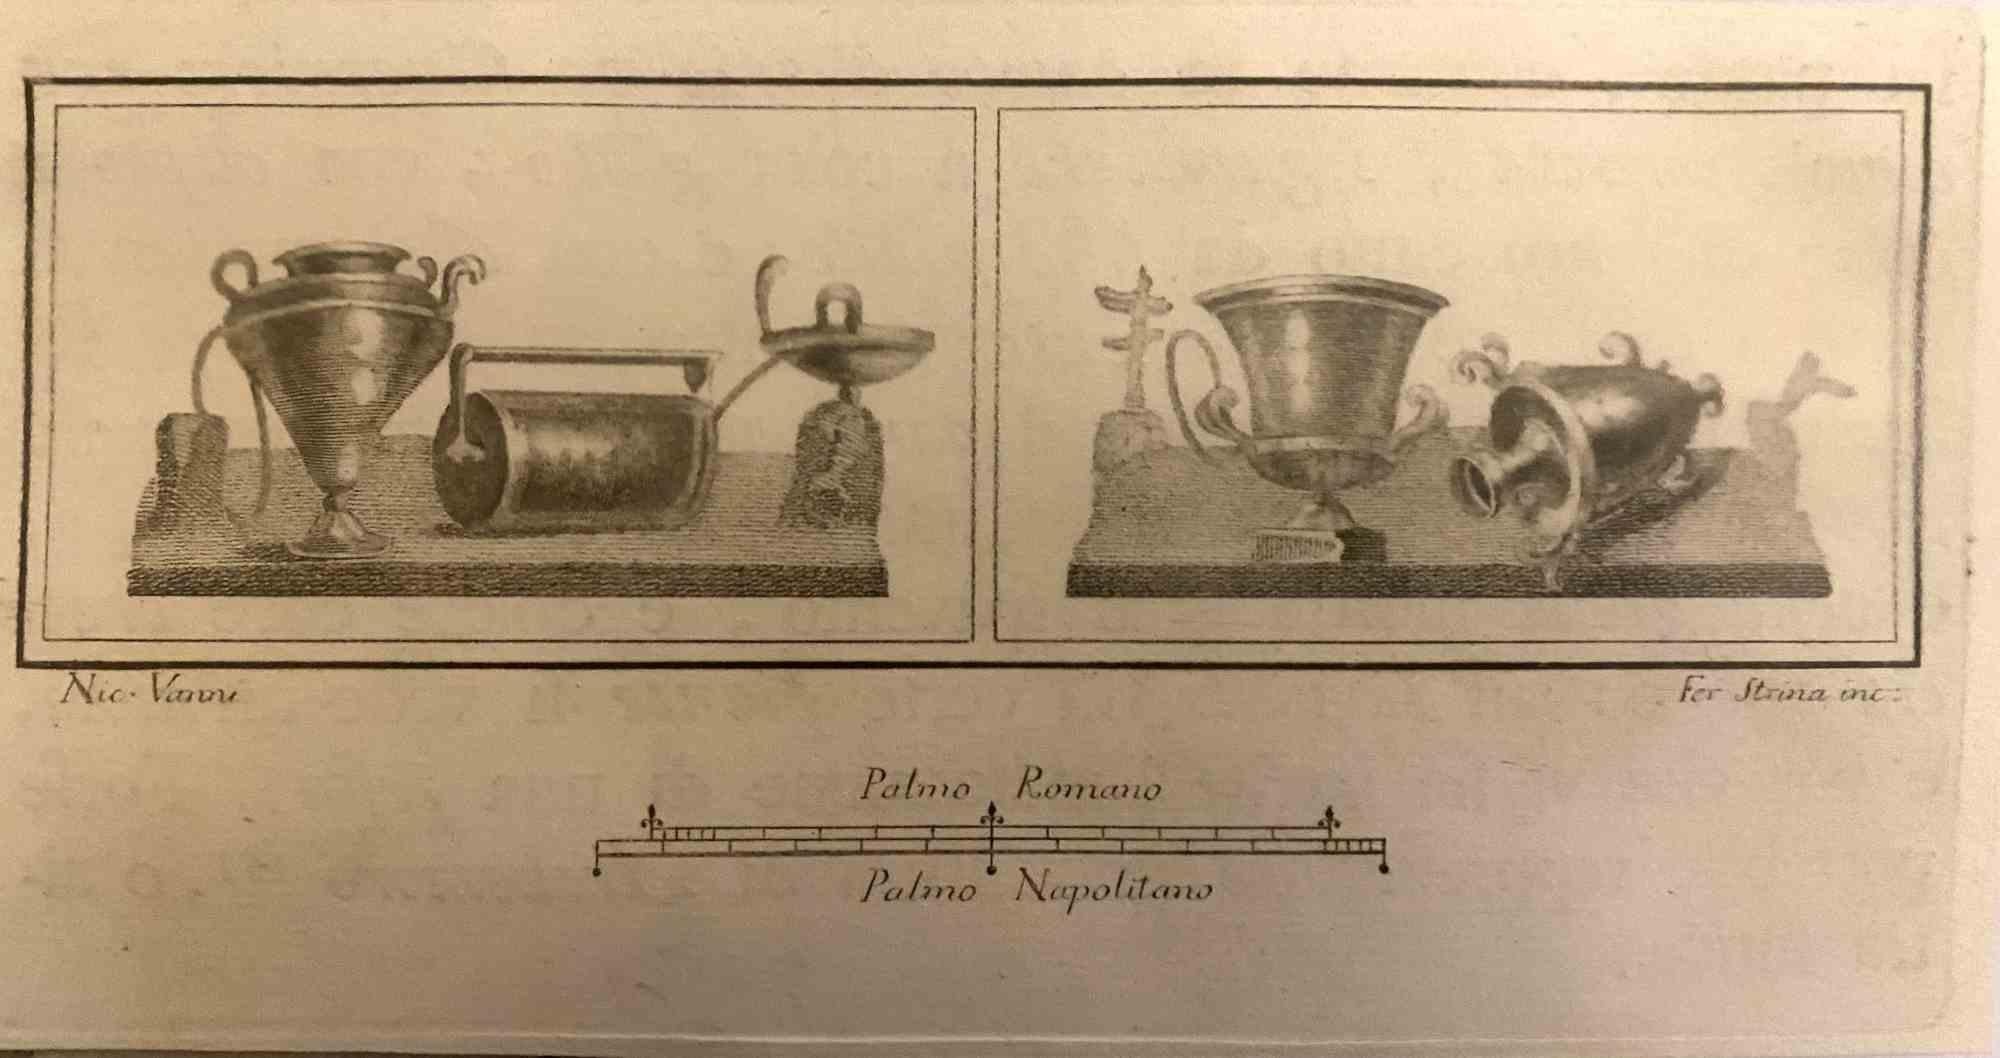 Pompeian Style Jar and Pitcher from "Antiquities of Herculaneum" is an etching on paper realized by Fernando Strina in the 18th Century.

Signed on the plate.

Good conditions.

The etching belongs to the print suite “Antiquities of Herculaneum